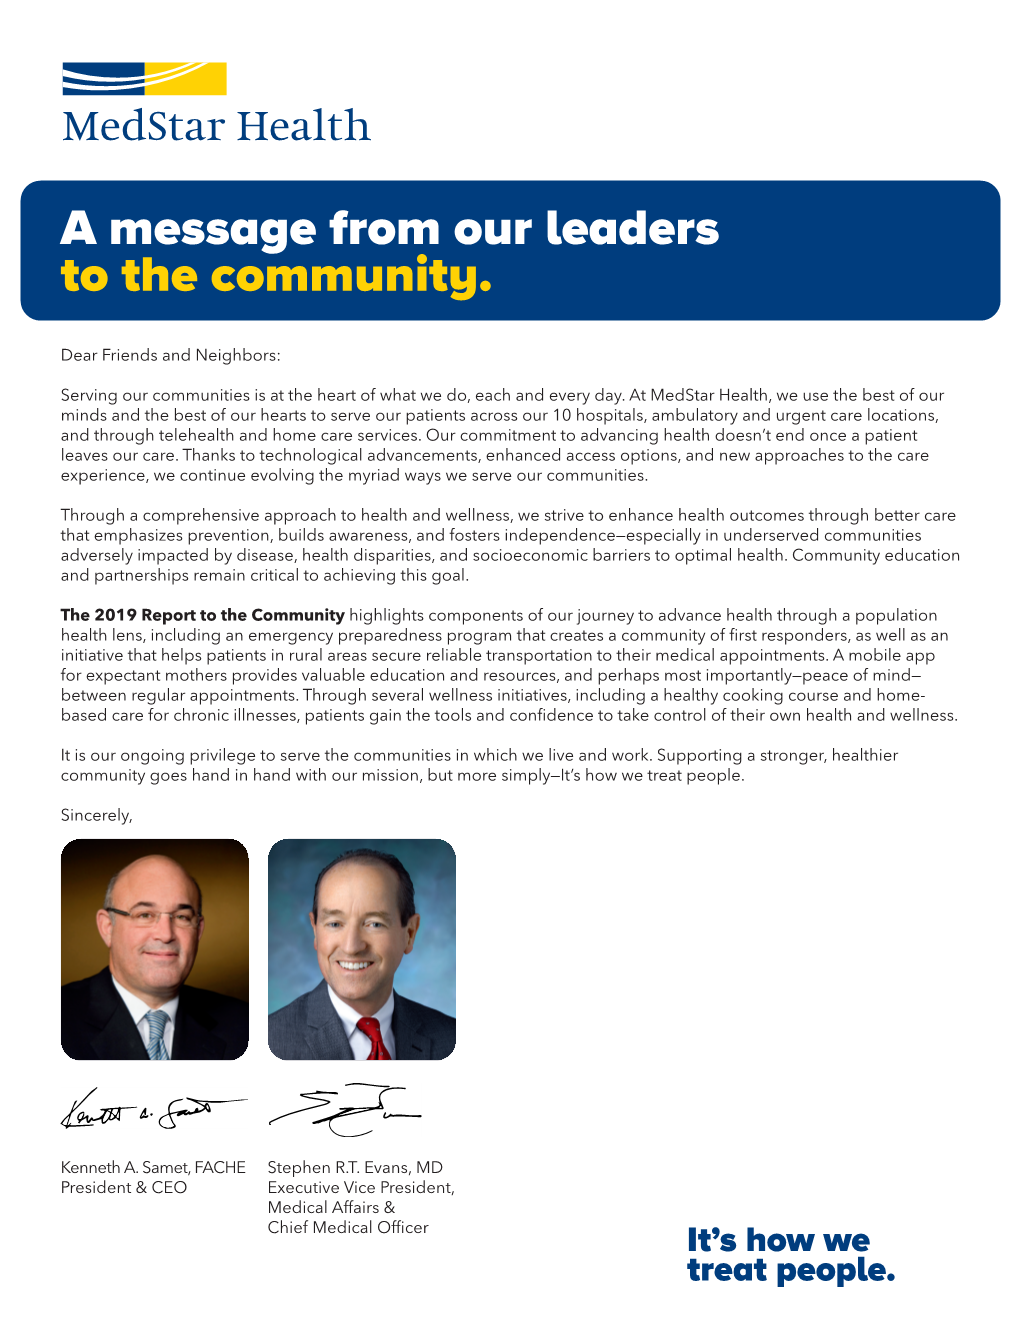 A Message from Our Leaders to the Community